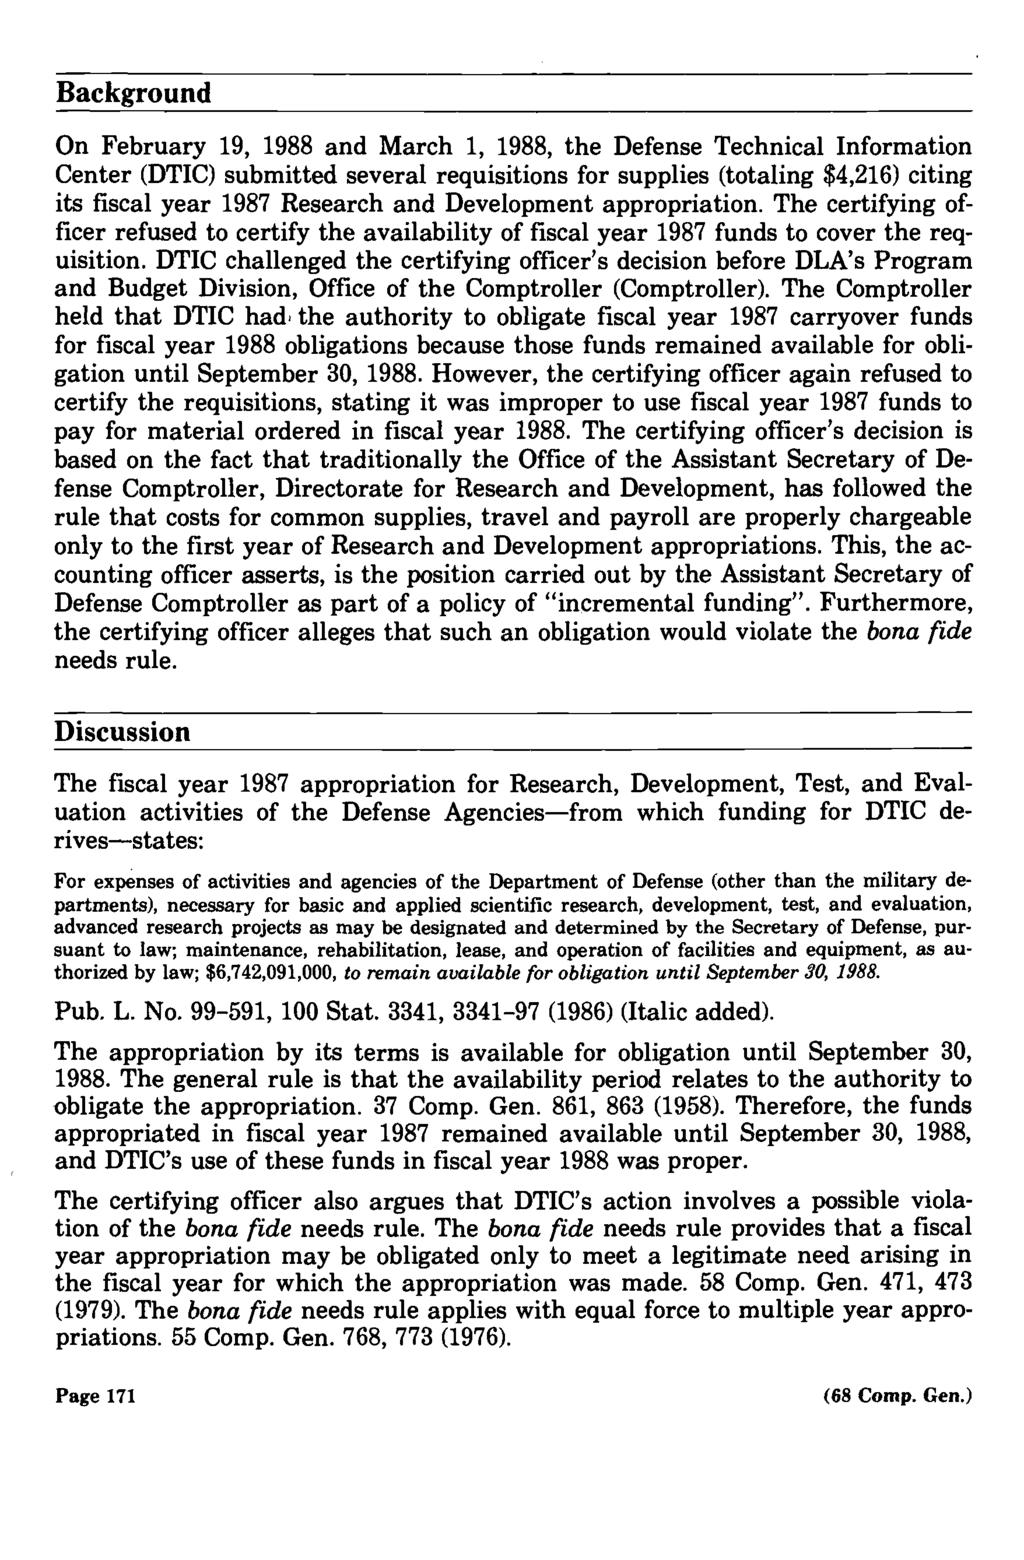 Background On February 19, 1988 and March 1, 1988, the Defense Technical Information Center (DTIC) submitted several requisitions for supplies (totaling $4,216) citing its fiscal year 1987 Research